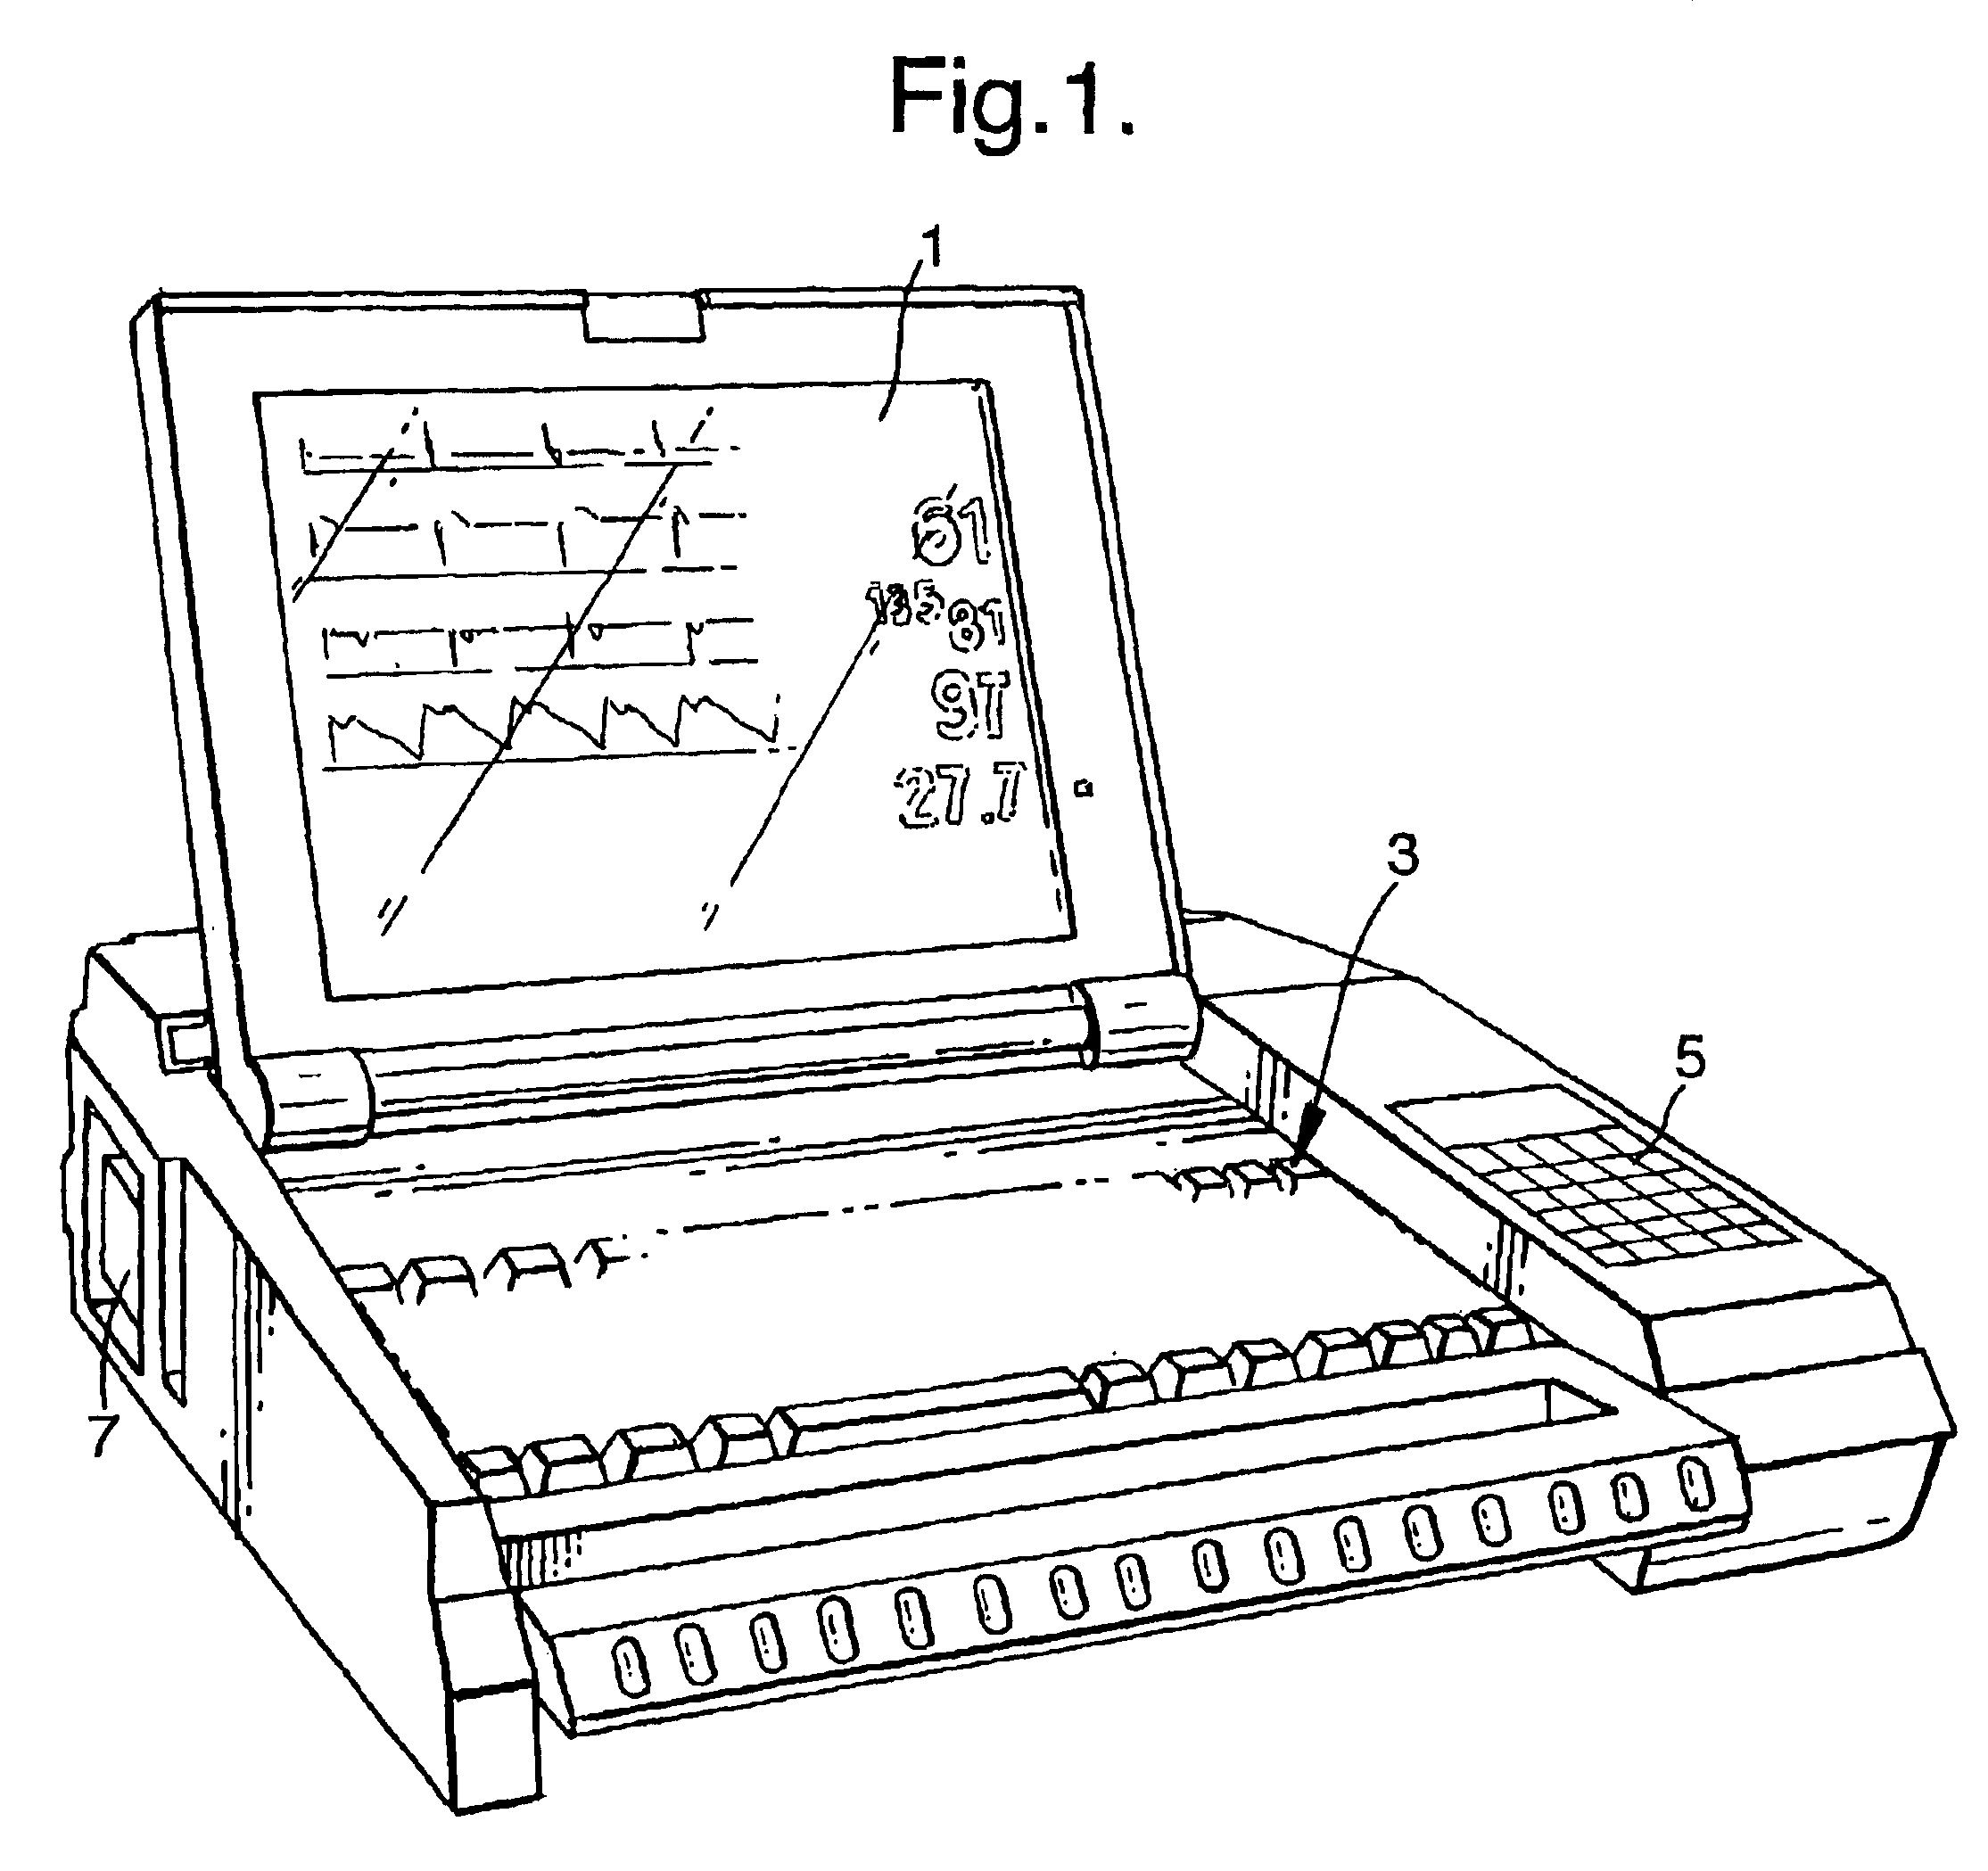 System and method for acquiring data